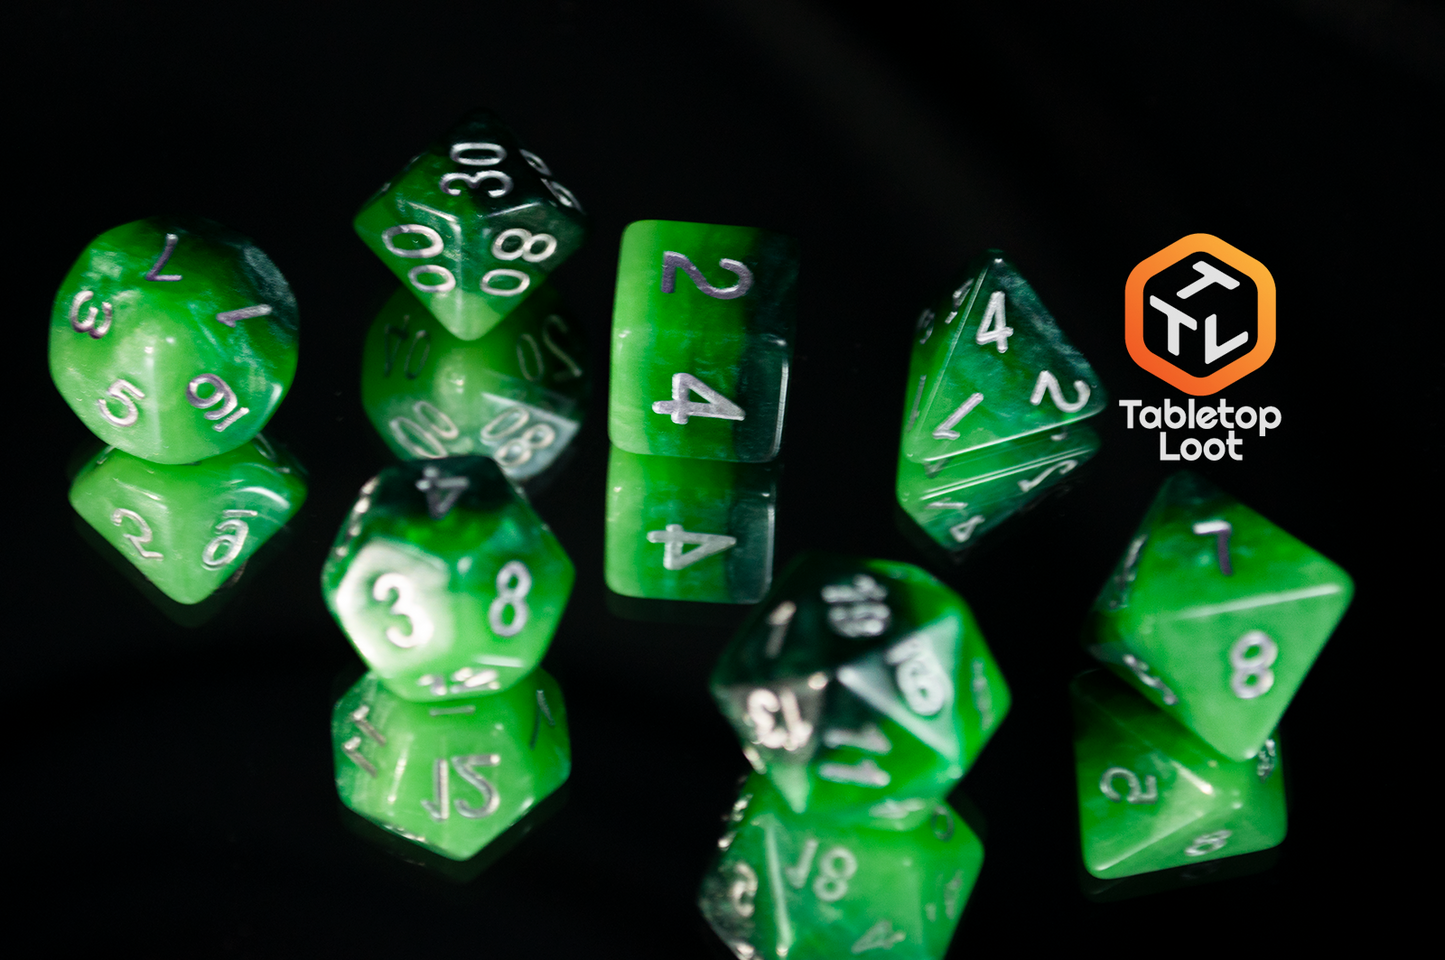 The 7 piece Necropolis dice set from Tabletop Loot with four layered shades of glittery green resin and silver numbering.